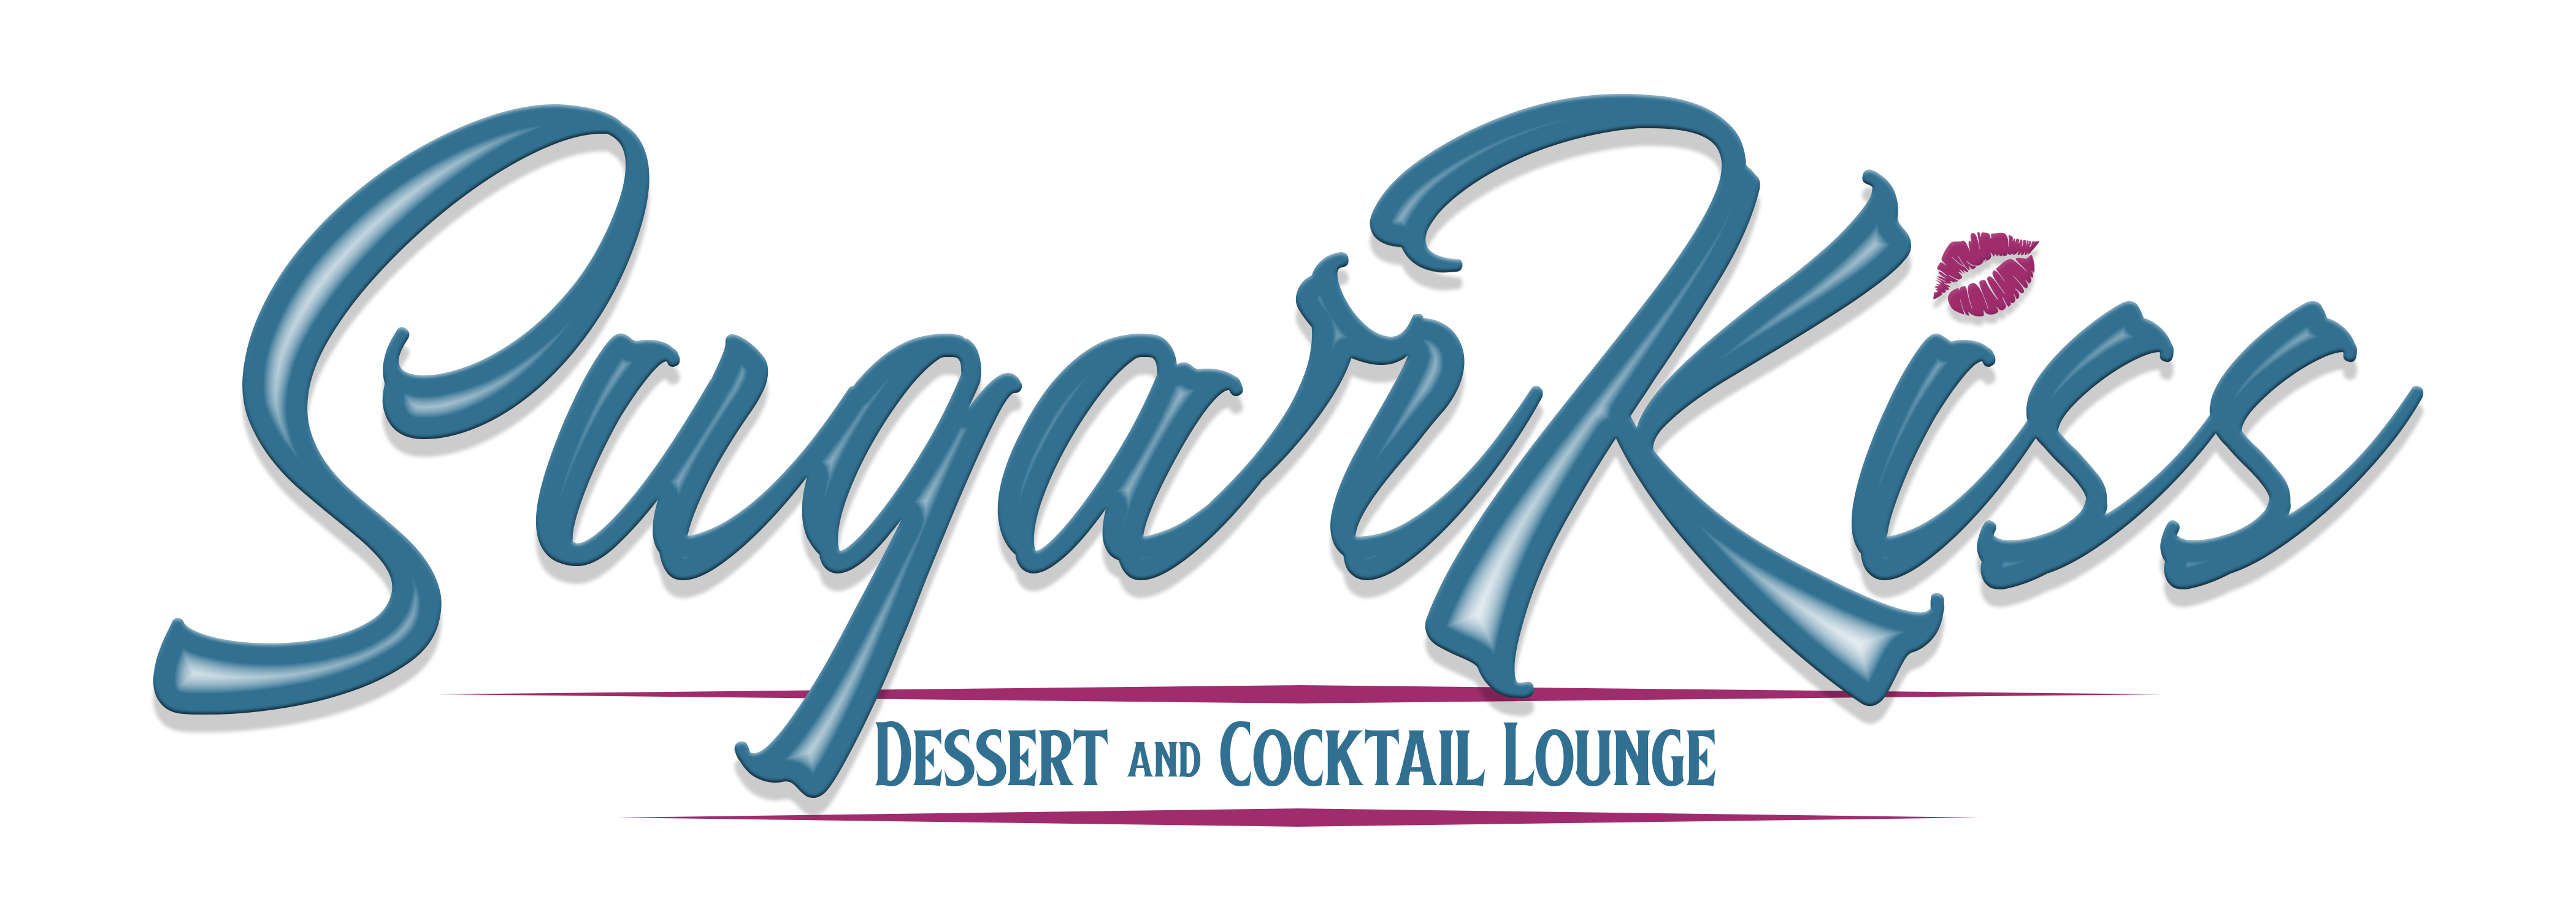 SugarKiss Dessert and Cocktail Lounge